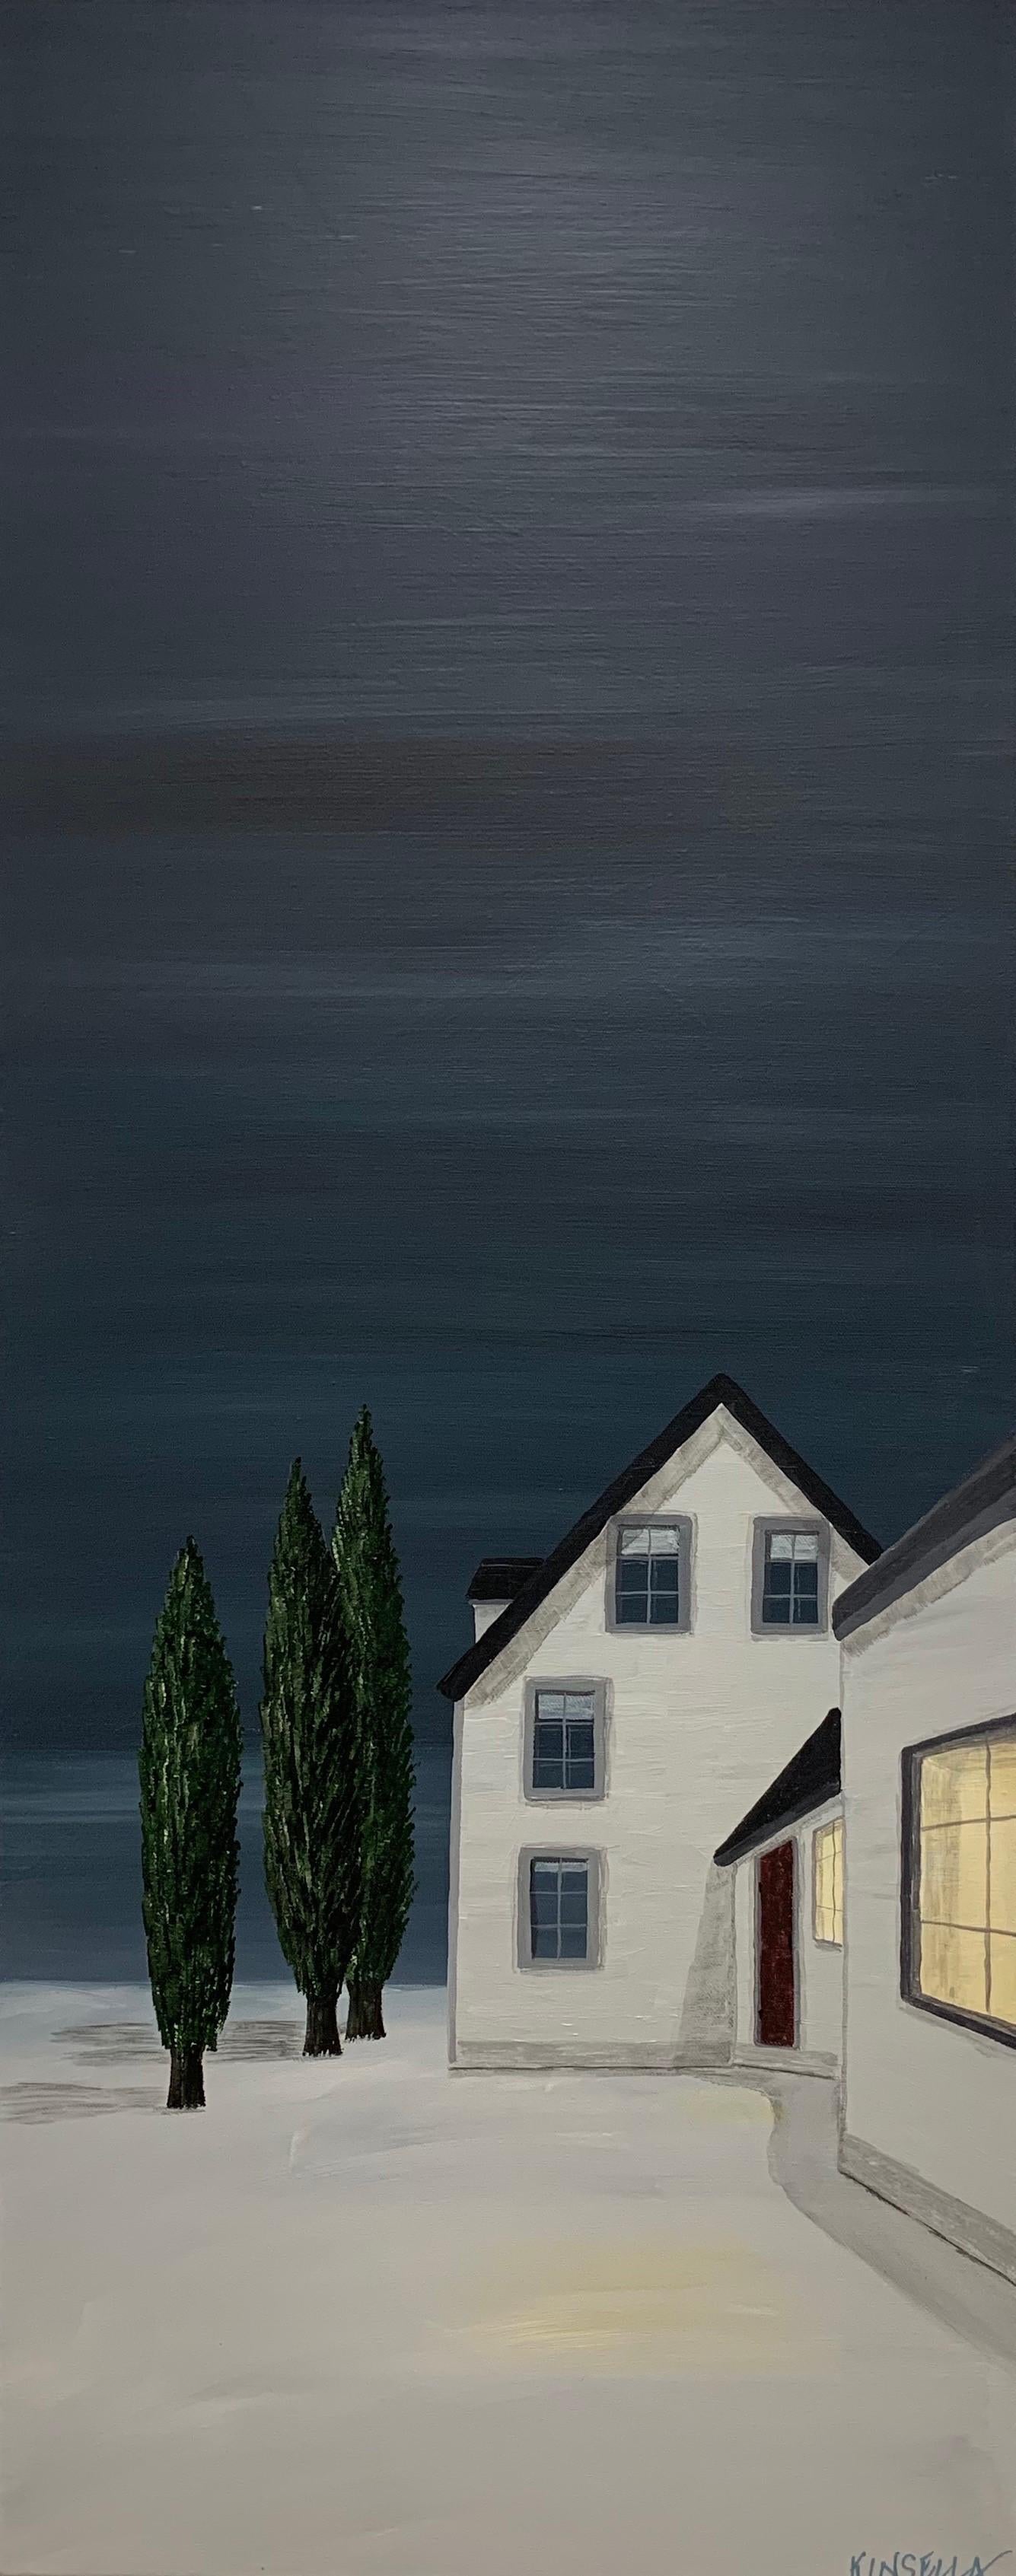 'Warmth Reflected' is a tall and narrow contemporary acrylic on canvas figurative painting created by American artist Susan Kinsella in 2019. Featuring a dark palette mostly made of grey, black, blue and green colors perfectly contrasted with beige